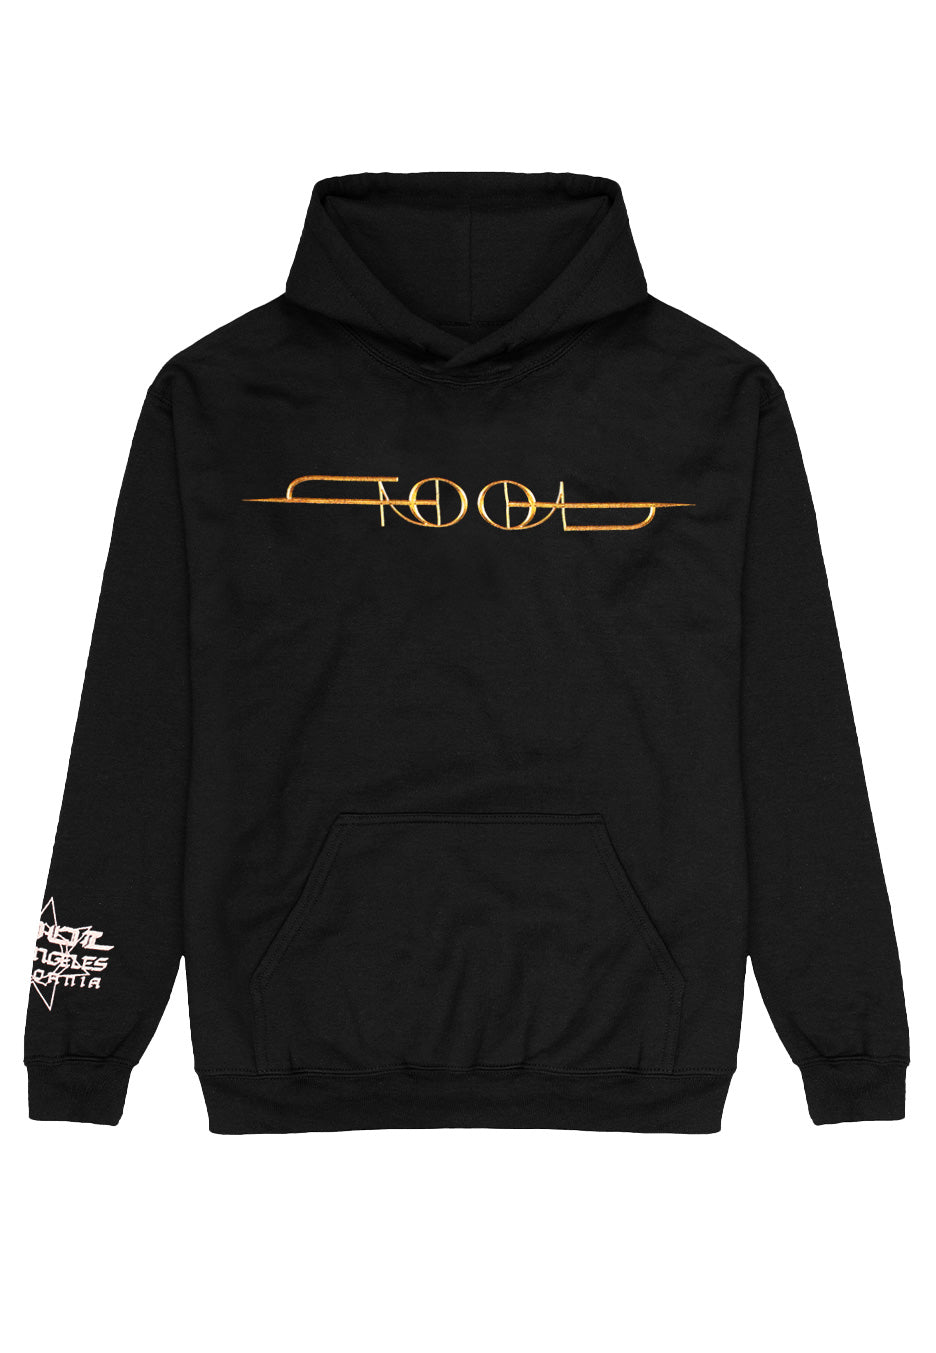 Tool - The Torch - Hoodie